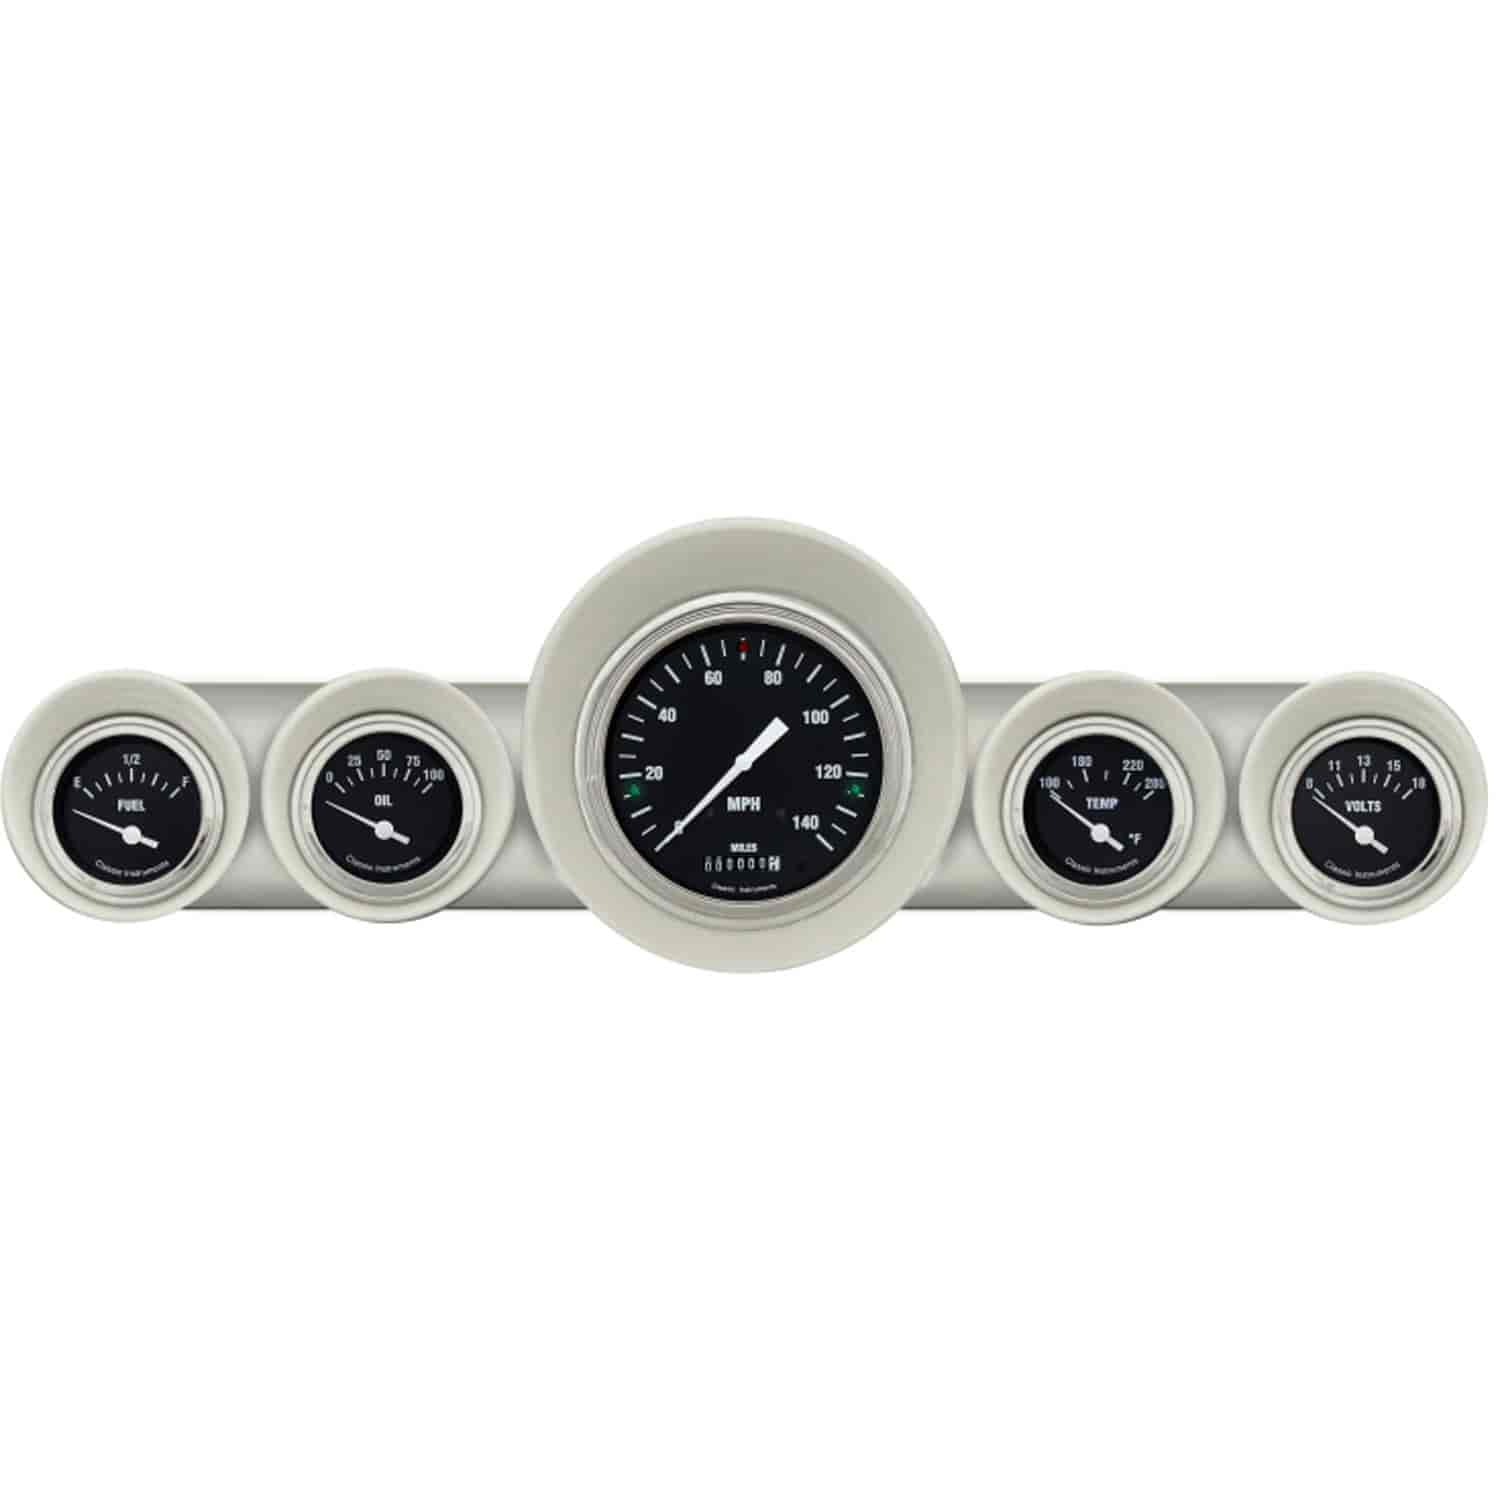 Hot Rod Series Gauge Package 1959-60 Full-Size Chevy Includes: